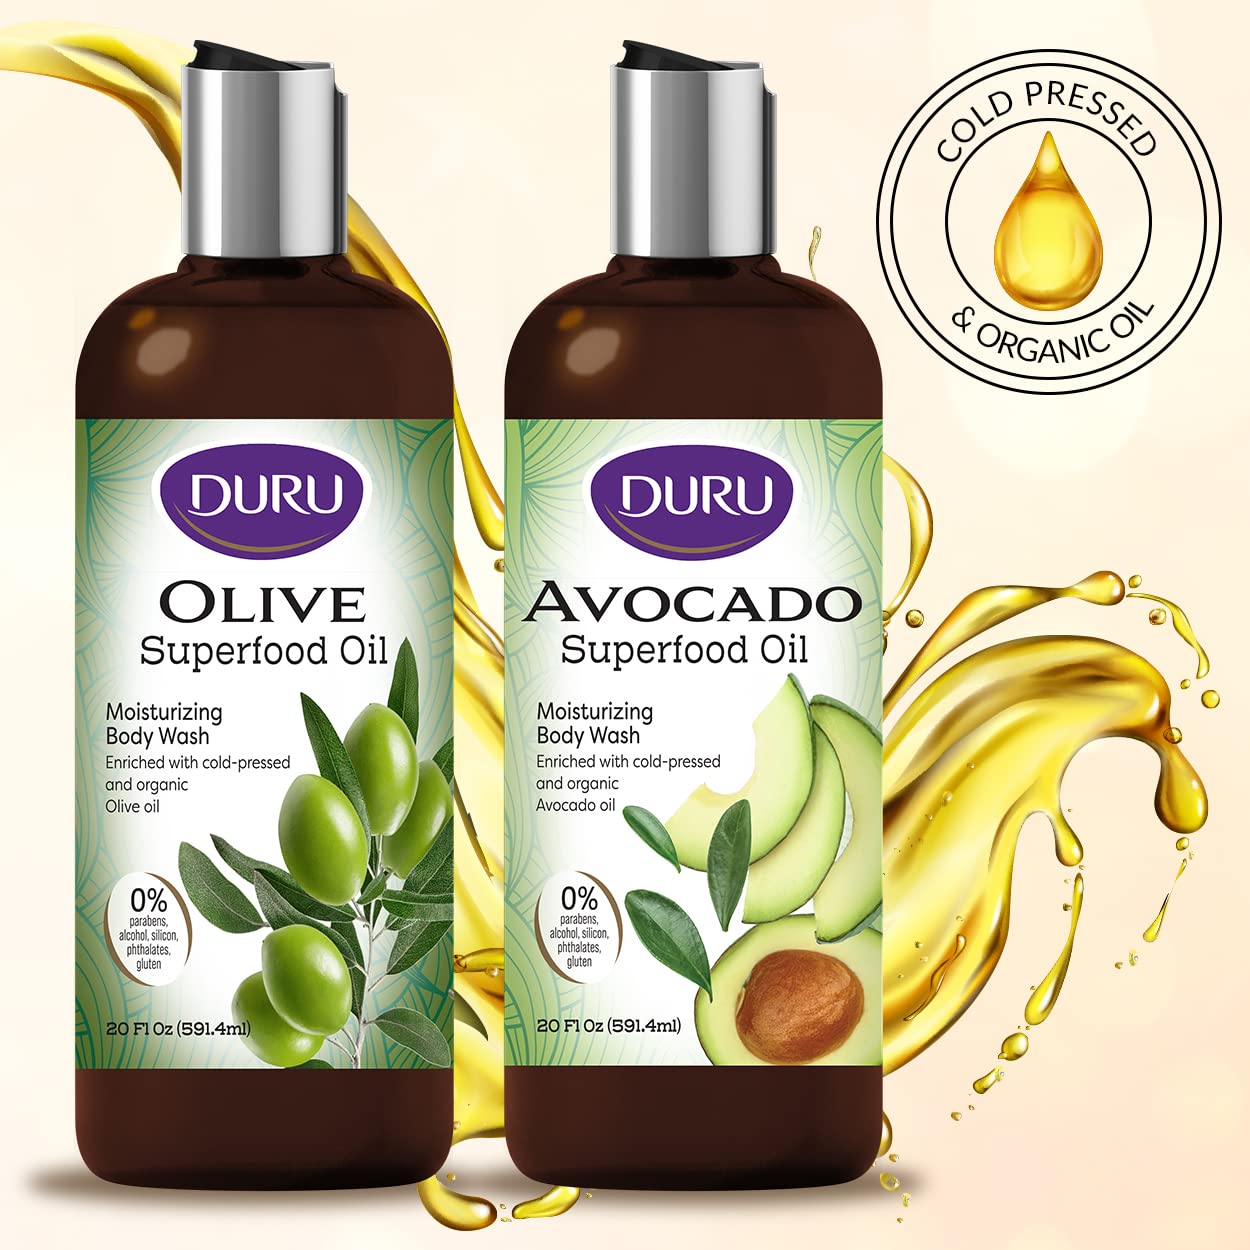 Duru Olive Oil Body Wash - Gentle Cleansing Moisturizing Sensitive Skin Shower Gel Paraben Free Alcohol Free Silicone Free Phthalete Free Gluten Free Body Wash : Beauty & Personal Care